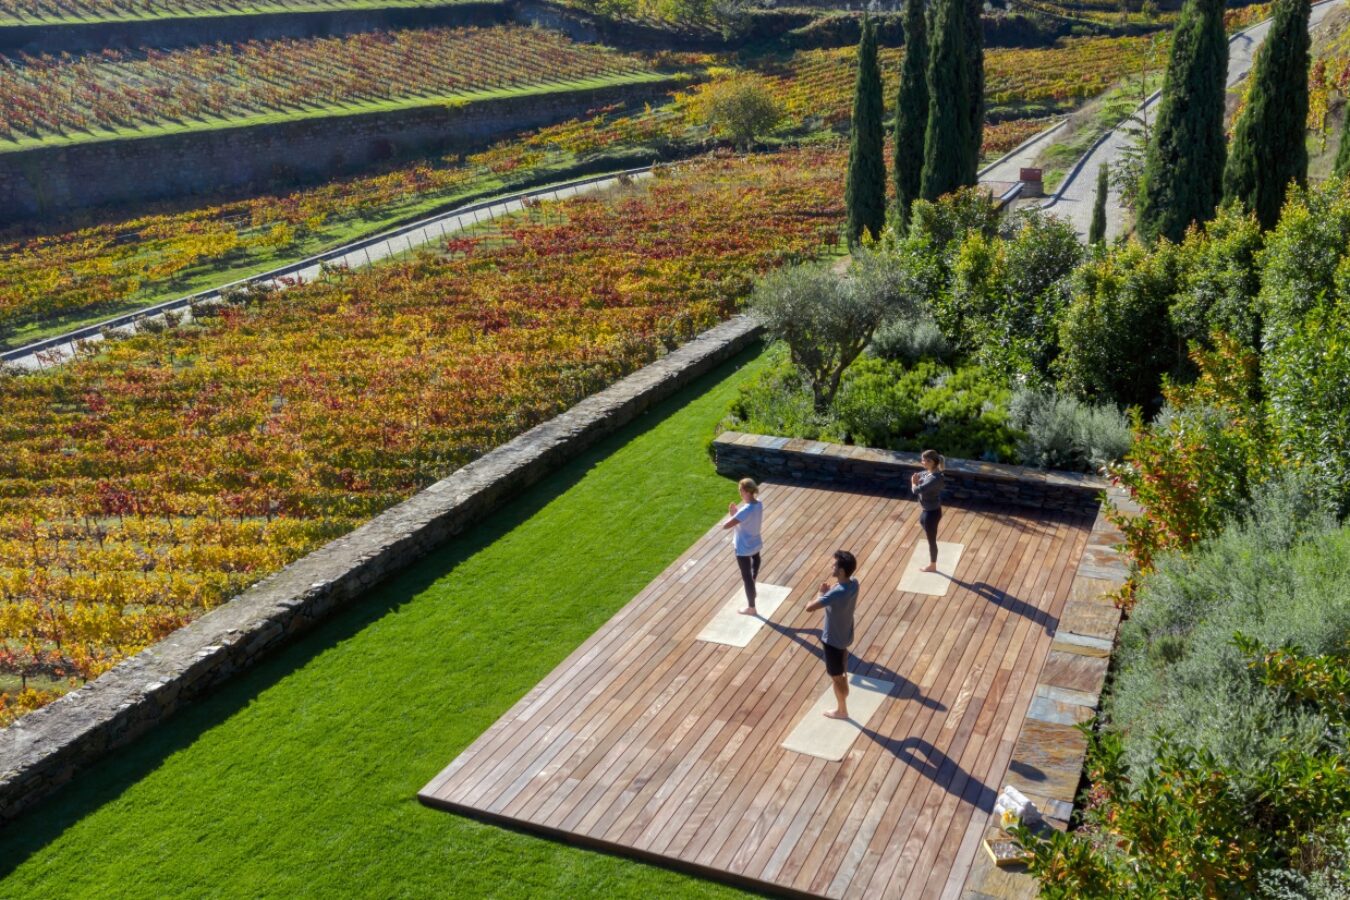 Review - We Check in to Six Senses, Douro Valley